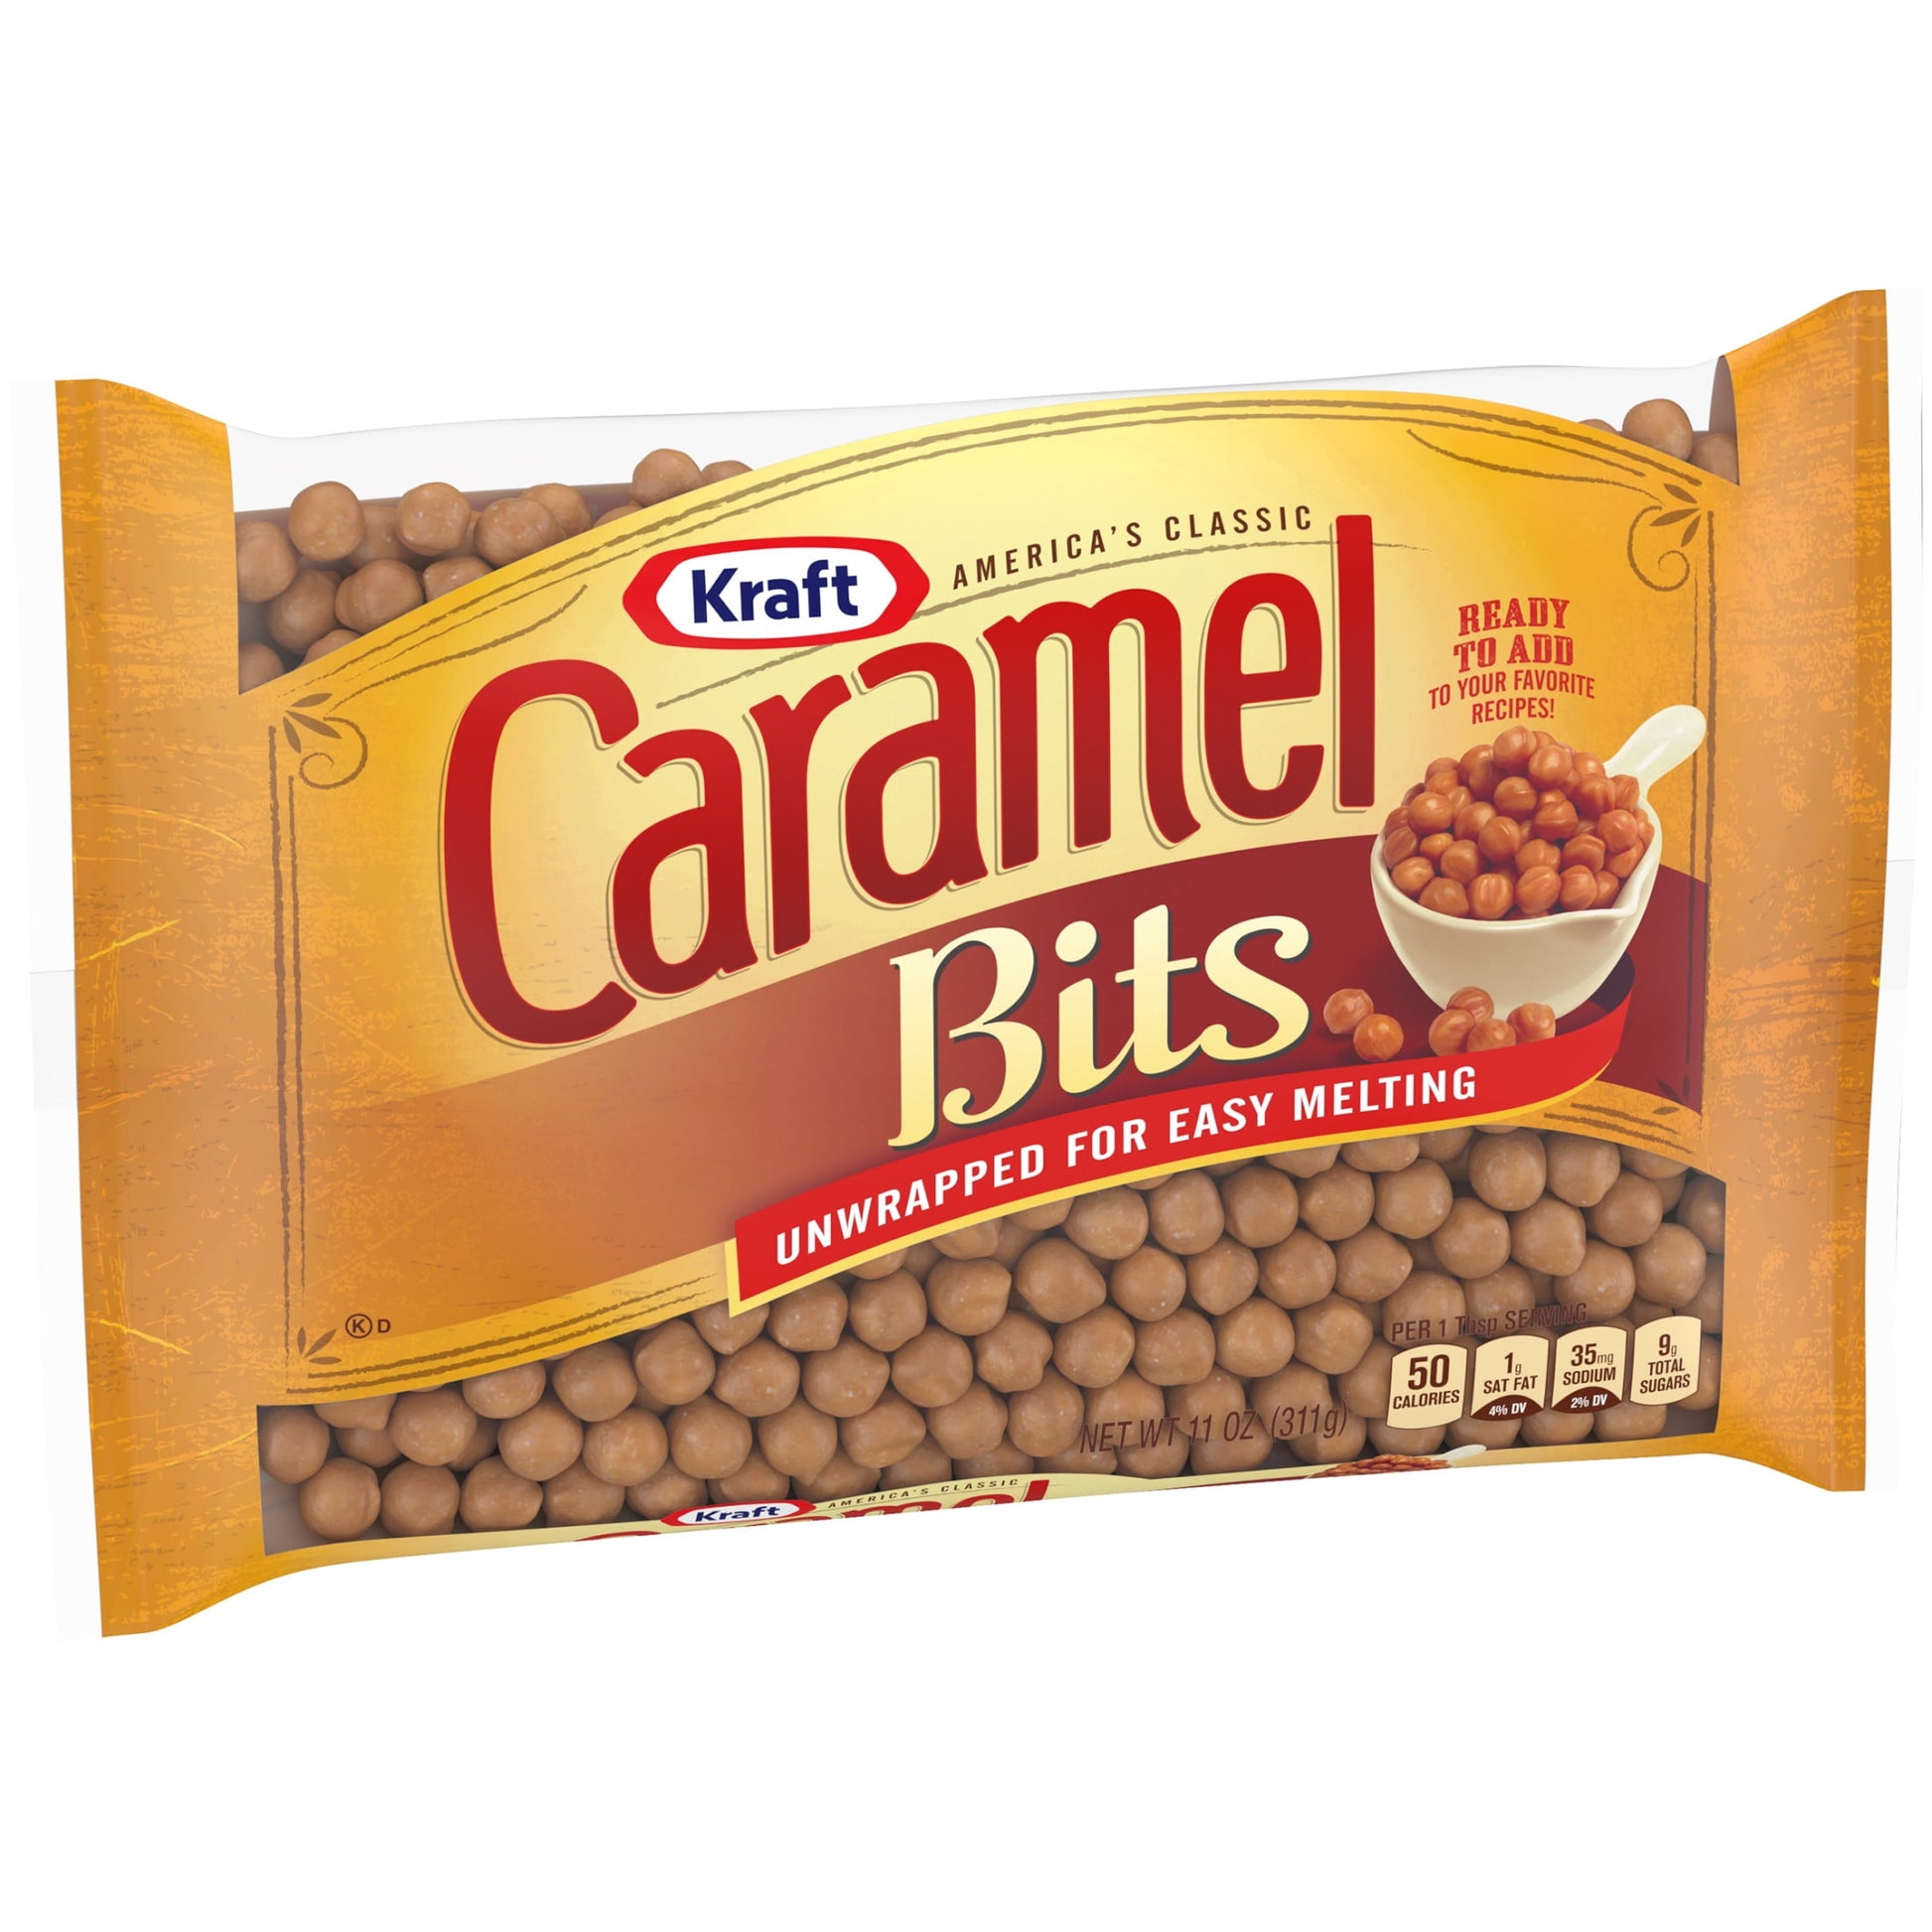 America'S Classic Unwrapped Candy Caramel Bits for Easy Melting, 11 Oz Bag